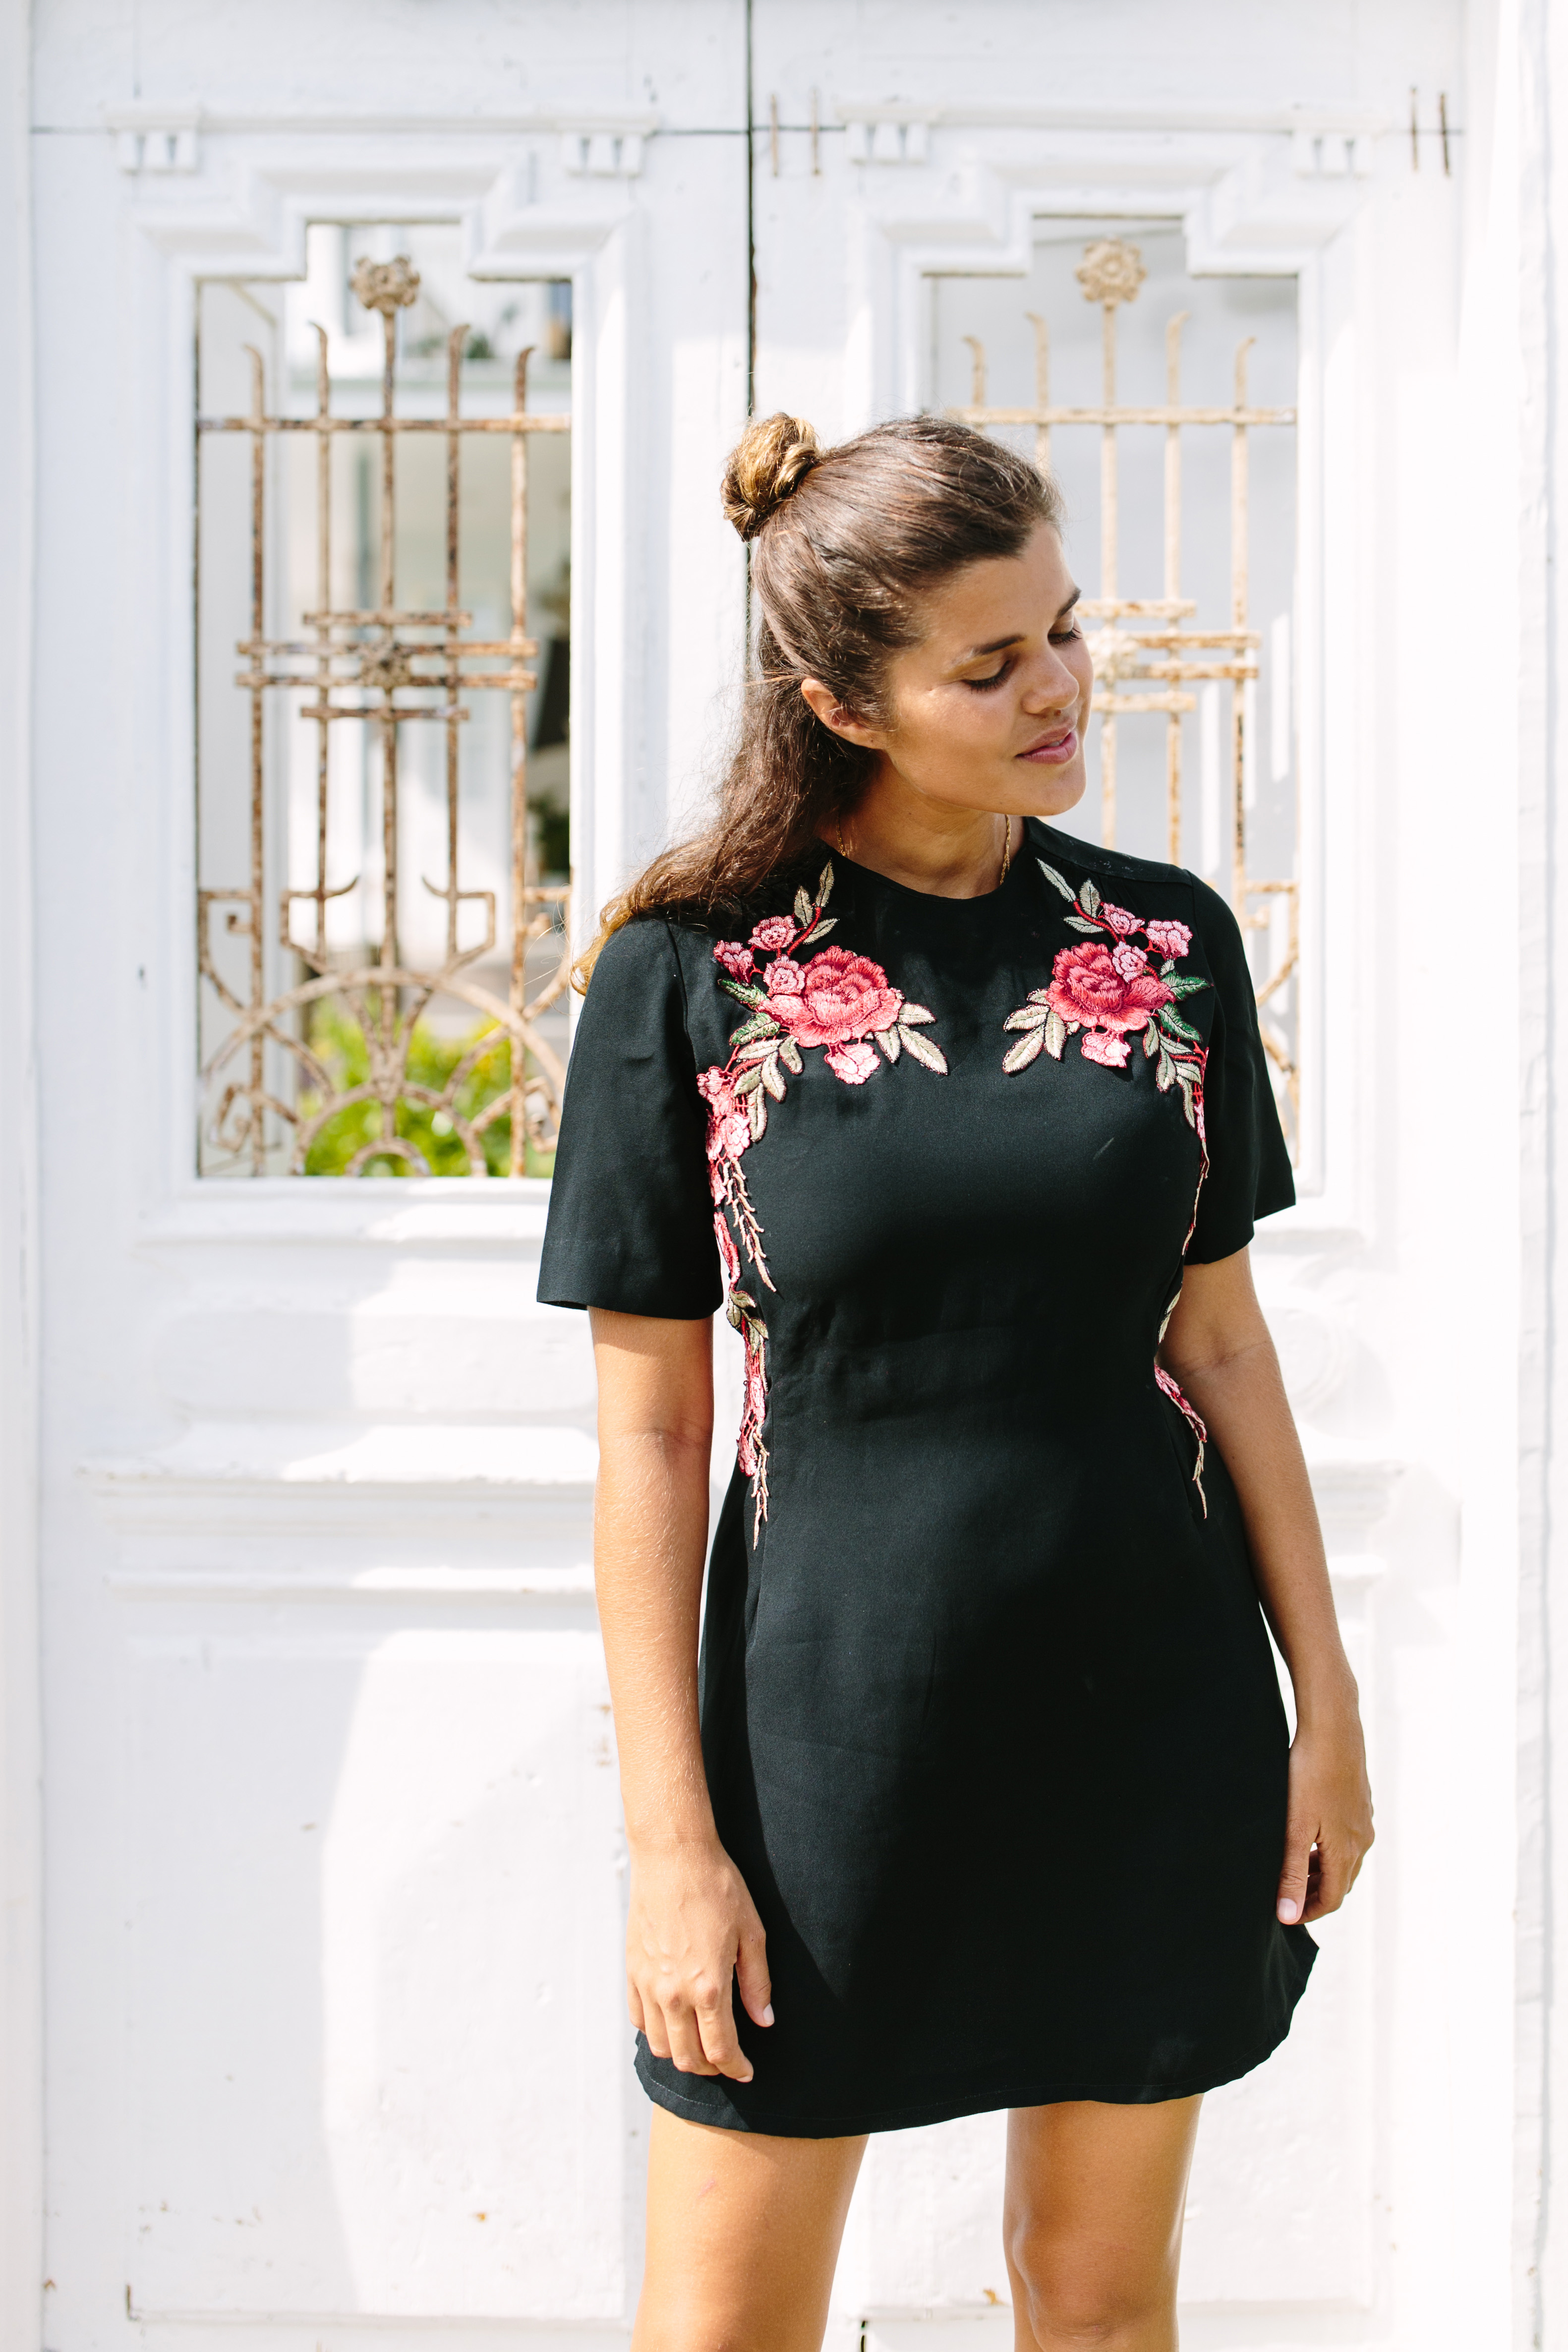 Make This Diy Embroidered Dress